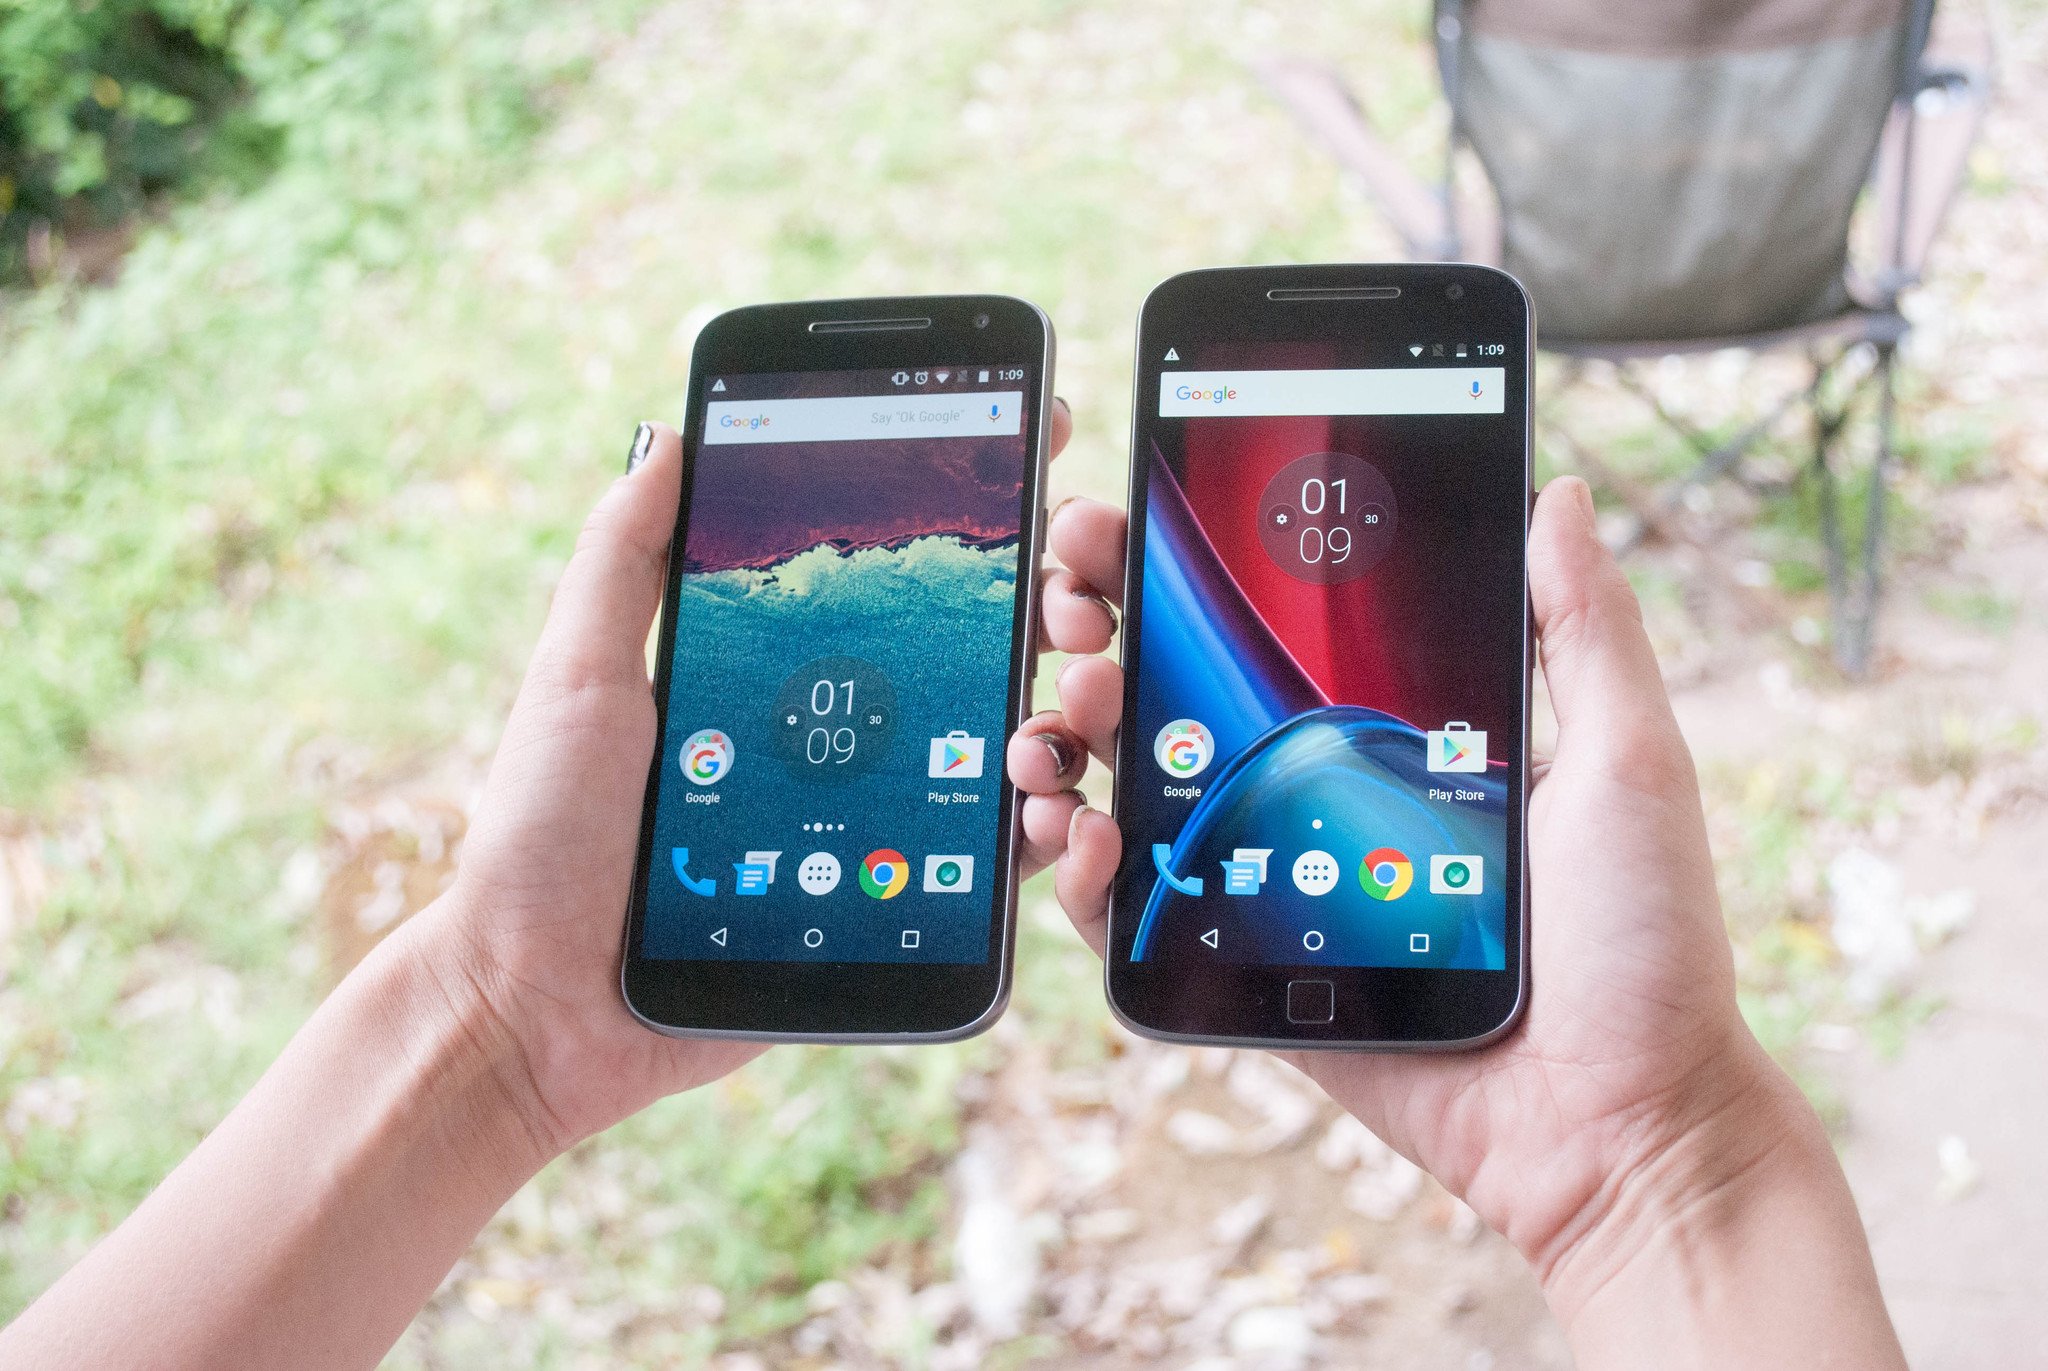 Moto G4 vs Moto G4 Plus - what's the difference?